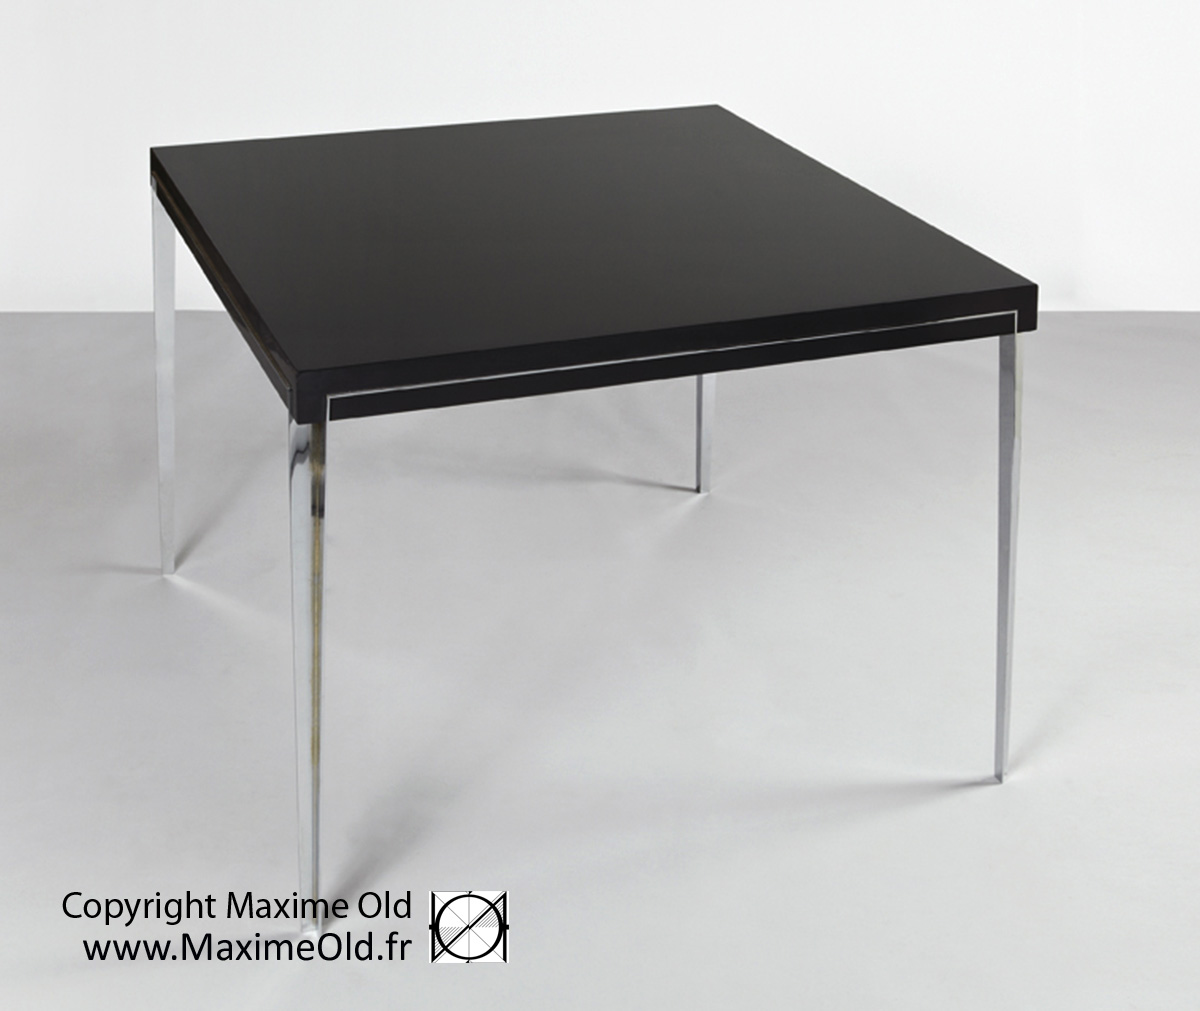 Maxime Old Tables-Desks: Maxime Old Paquebot France Onyx Table